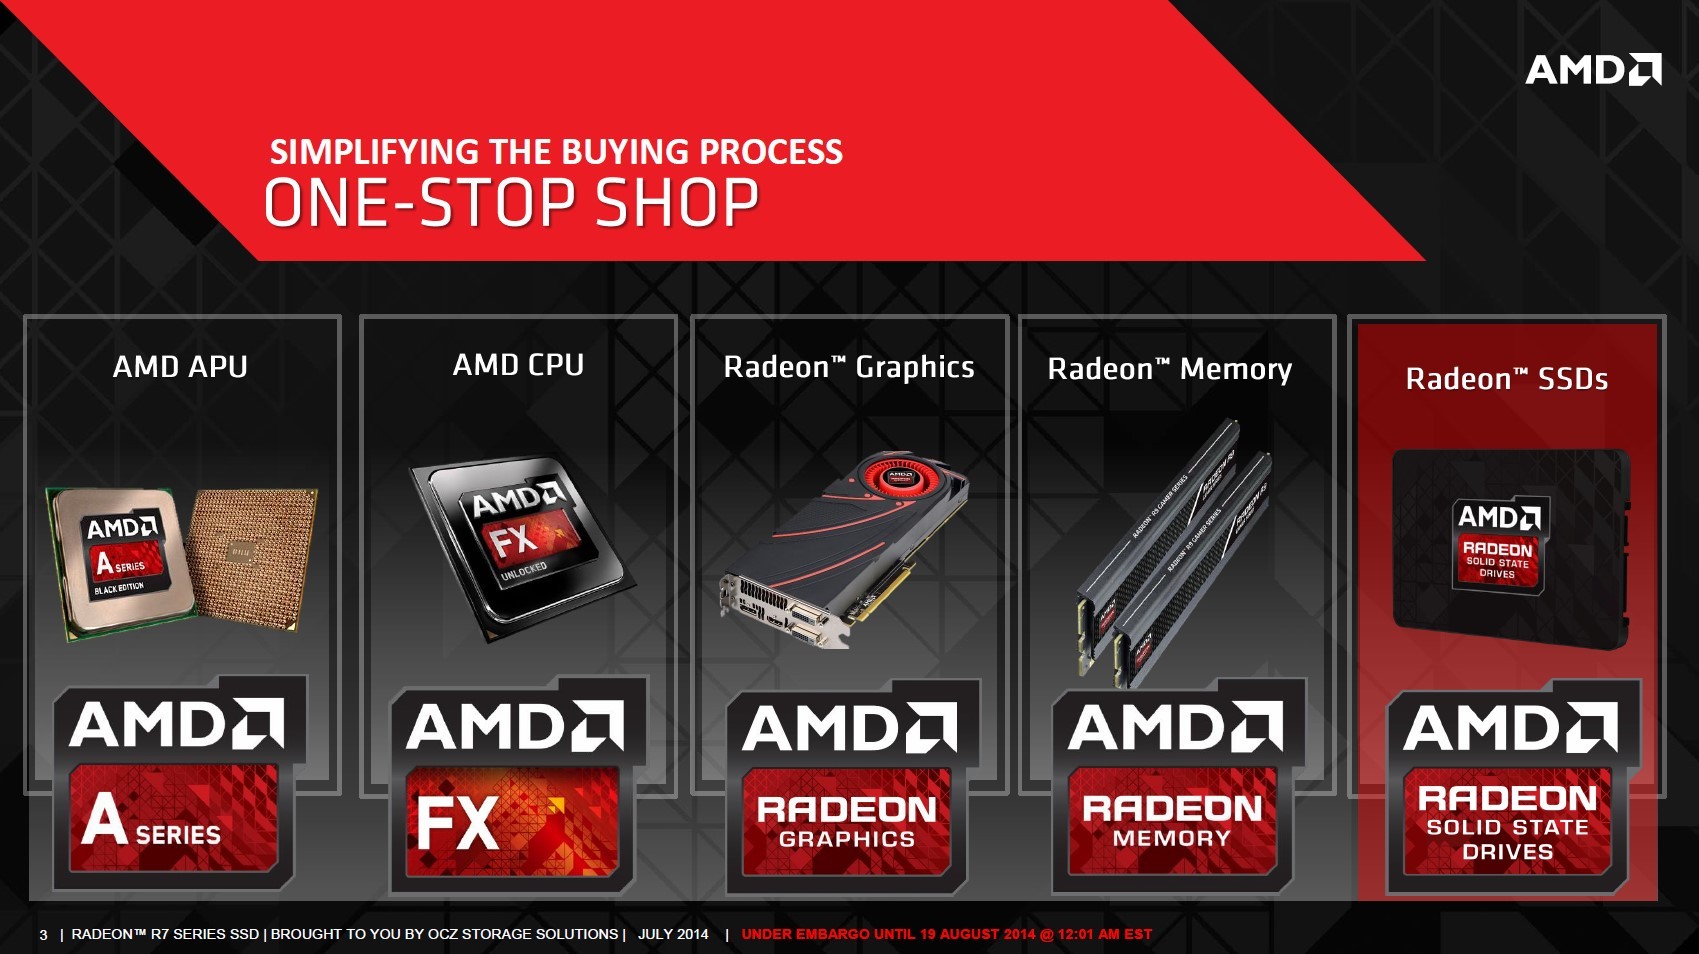 Media asset in full size related to 3dfxzone.it news item entitled as follows: AMD annuncia la linea di drive a stato solido (SSD) Radeon R7 | Image Name: news21522_AMD-Radeon-R7-SSD_3.jpg